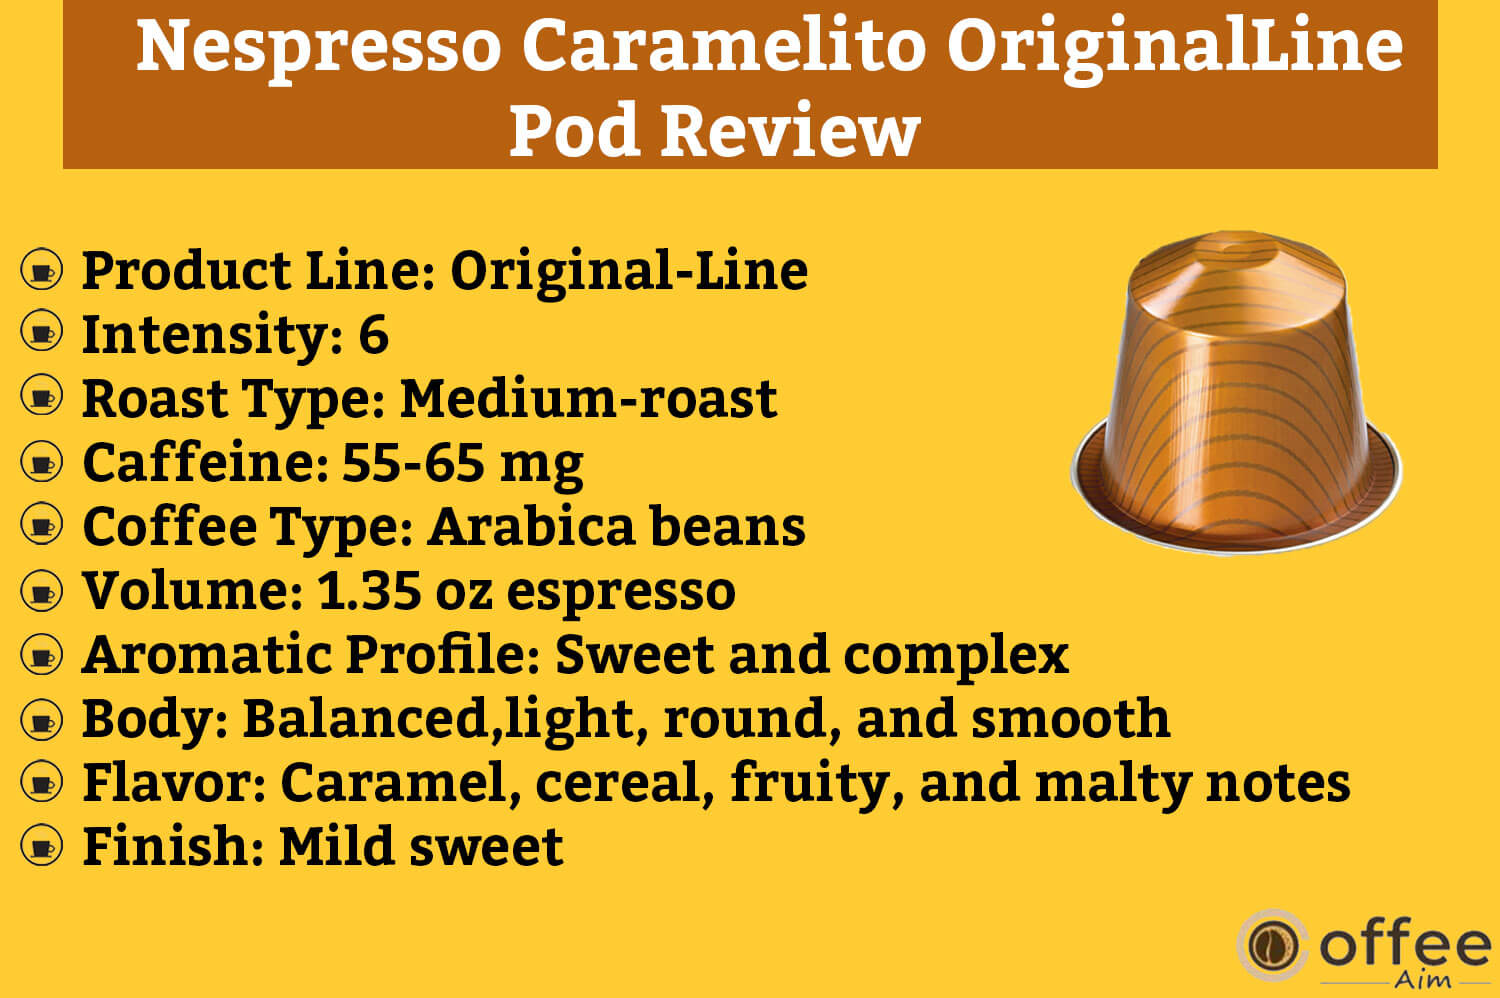 The image depicts the defining feature of the "Nespresso Caramelito OriginalLine Pod" in the review article "Nespresso Caramelito OriginalLine Pod Review."